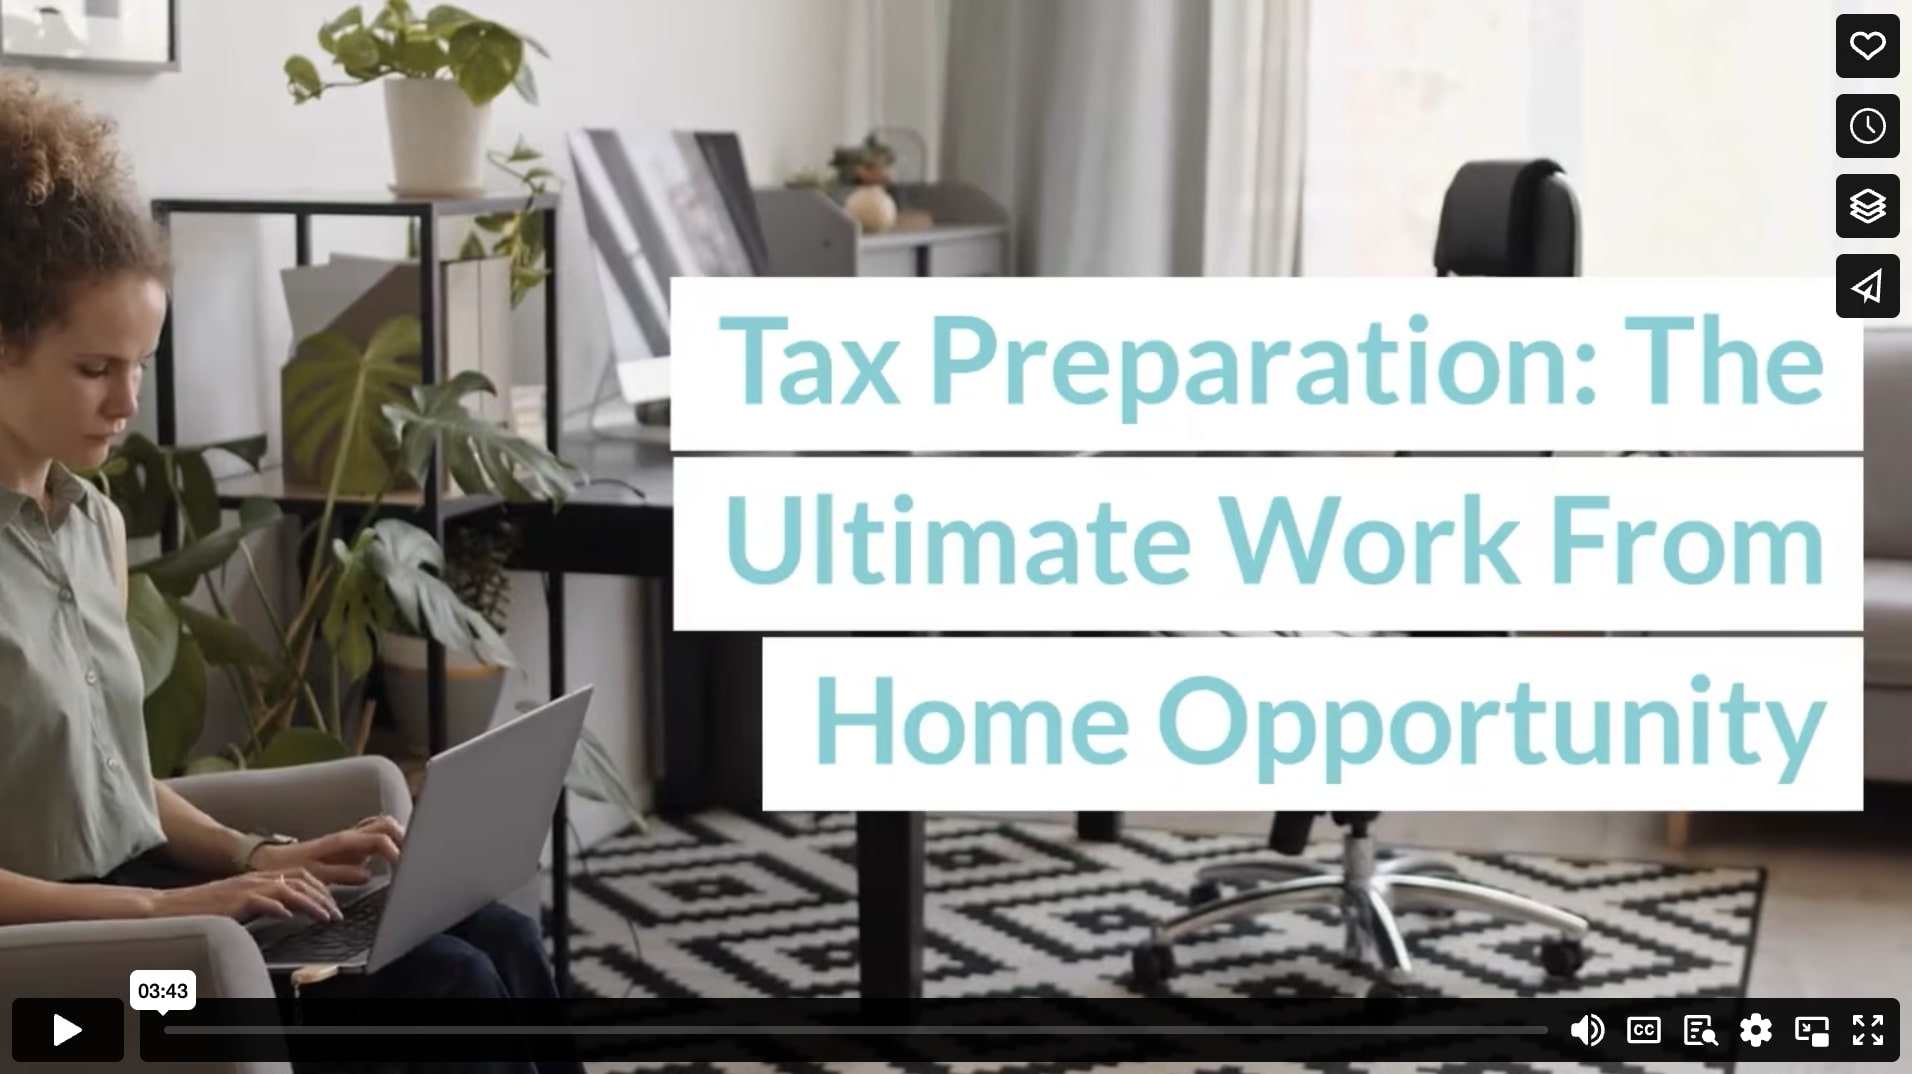 Tax Preparation: The Ultimate Work From Home Opportunity